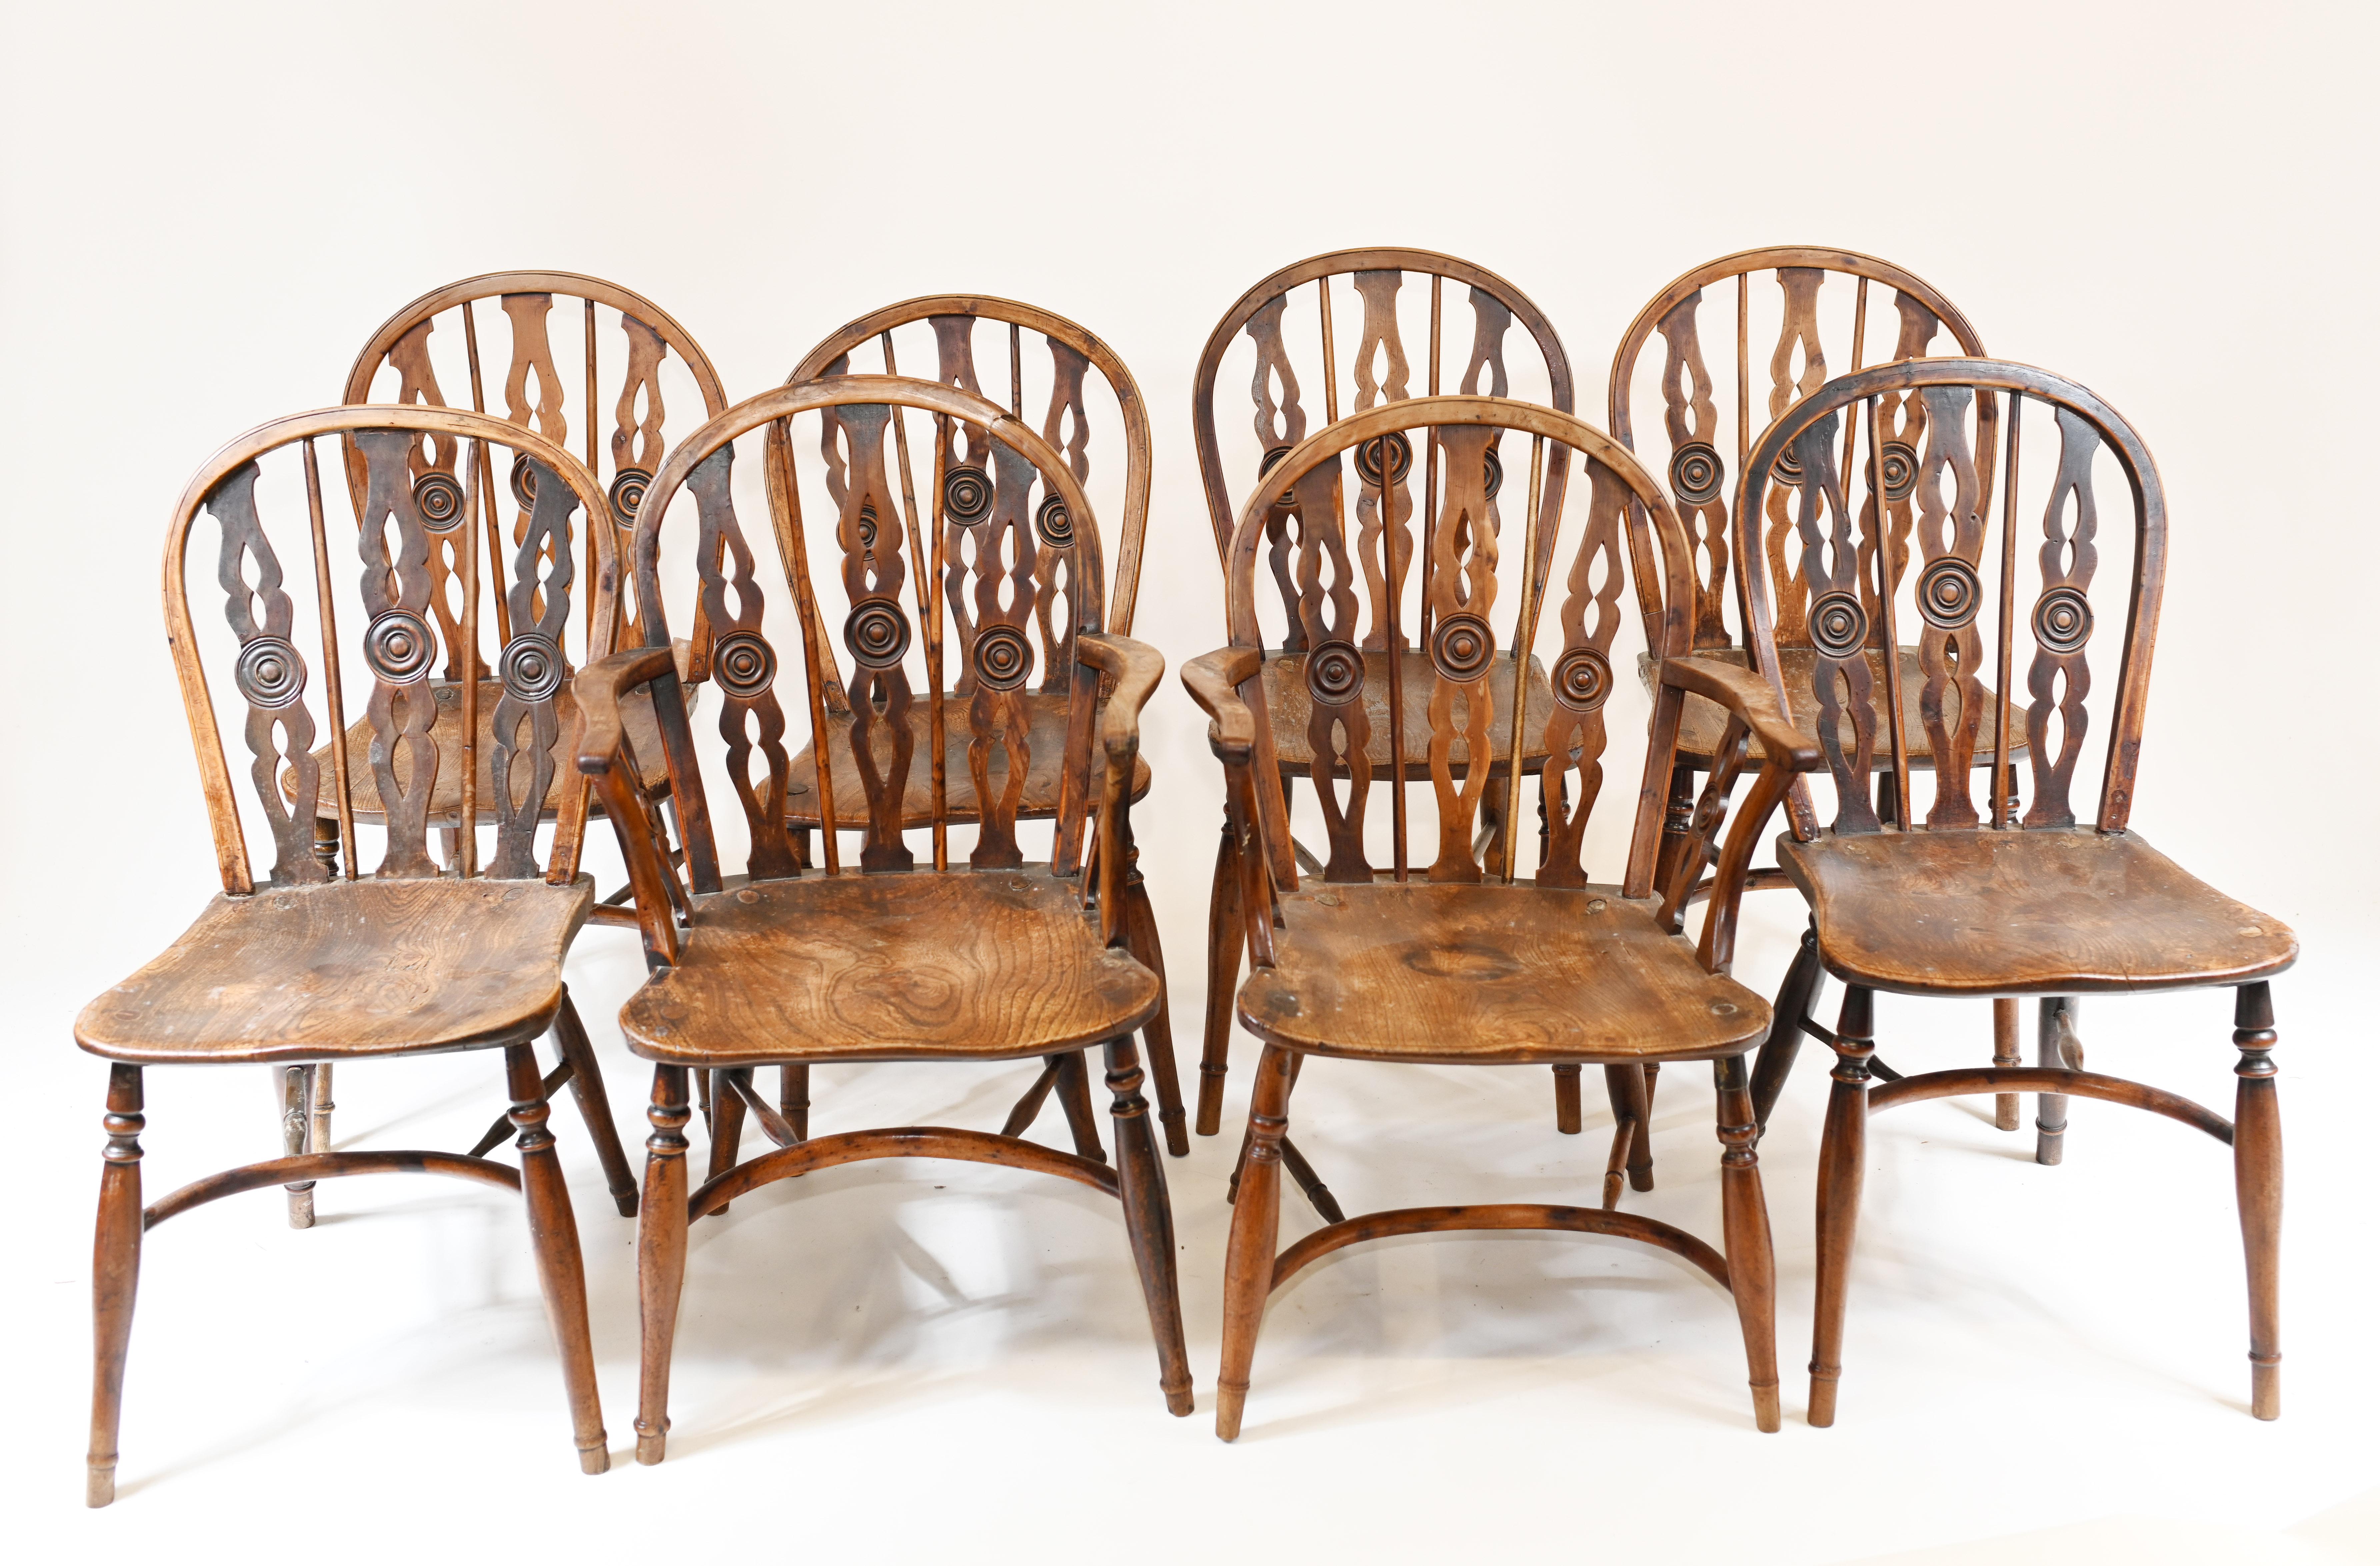 Set of 8 unique Windsor chairs in elm wood
The most striking thing about this set is the unusual carving to the back rest
Set consists of two arm chairs and six sides
Great set for the kitchen
Would look wonderful around some of our range of